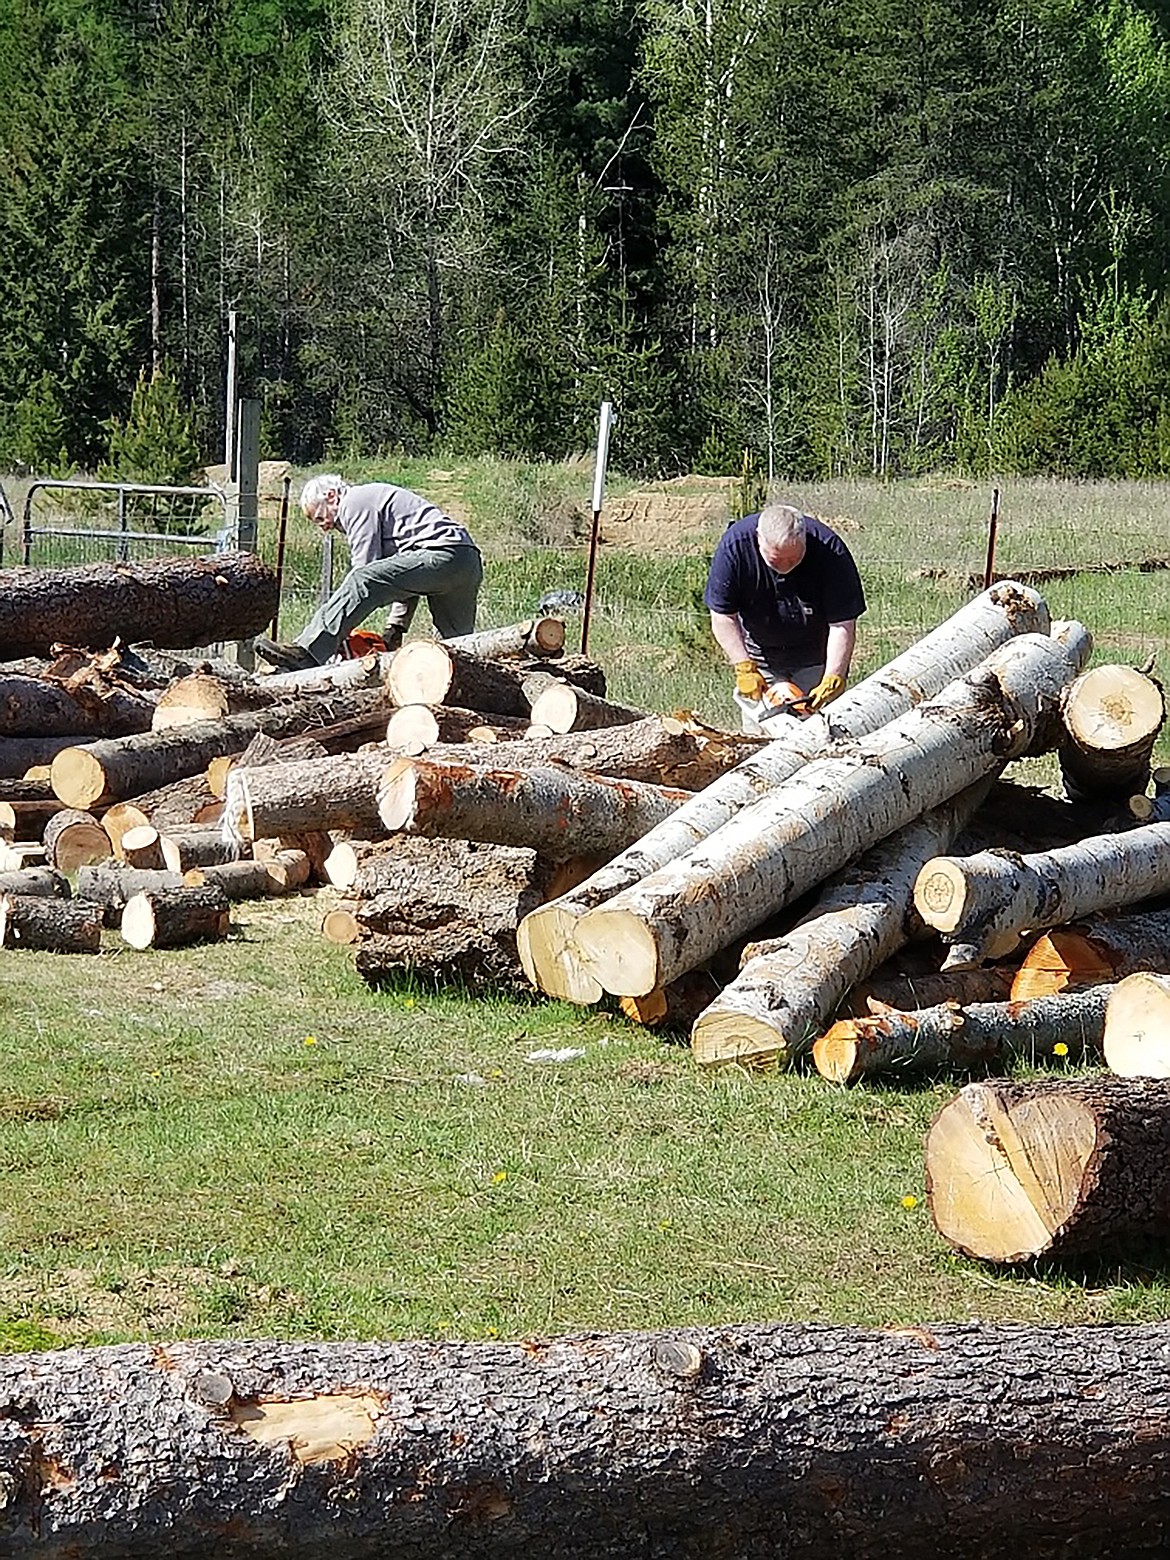 Firewood Rescue volunteers are hard at work getting wood ready for when they hear about someone in need of wood to keep their home warm.